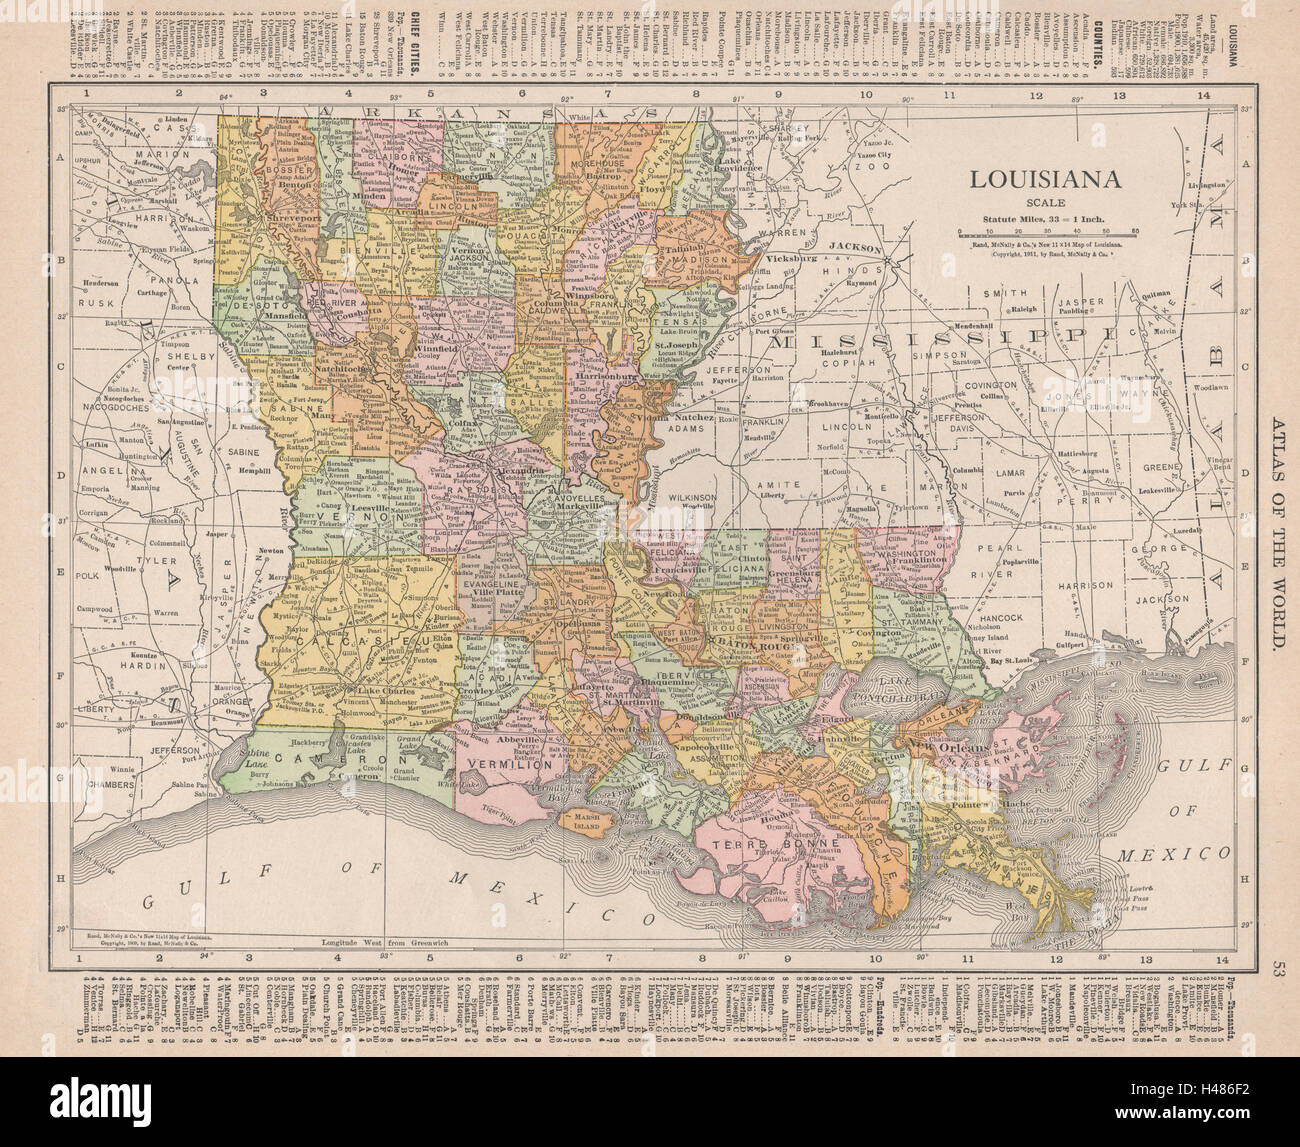 Louisiana state map showing parishes. RAND MCNALLY 1912 old antique chart Stock Photo